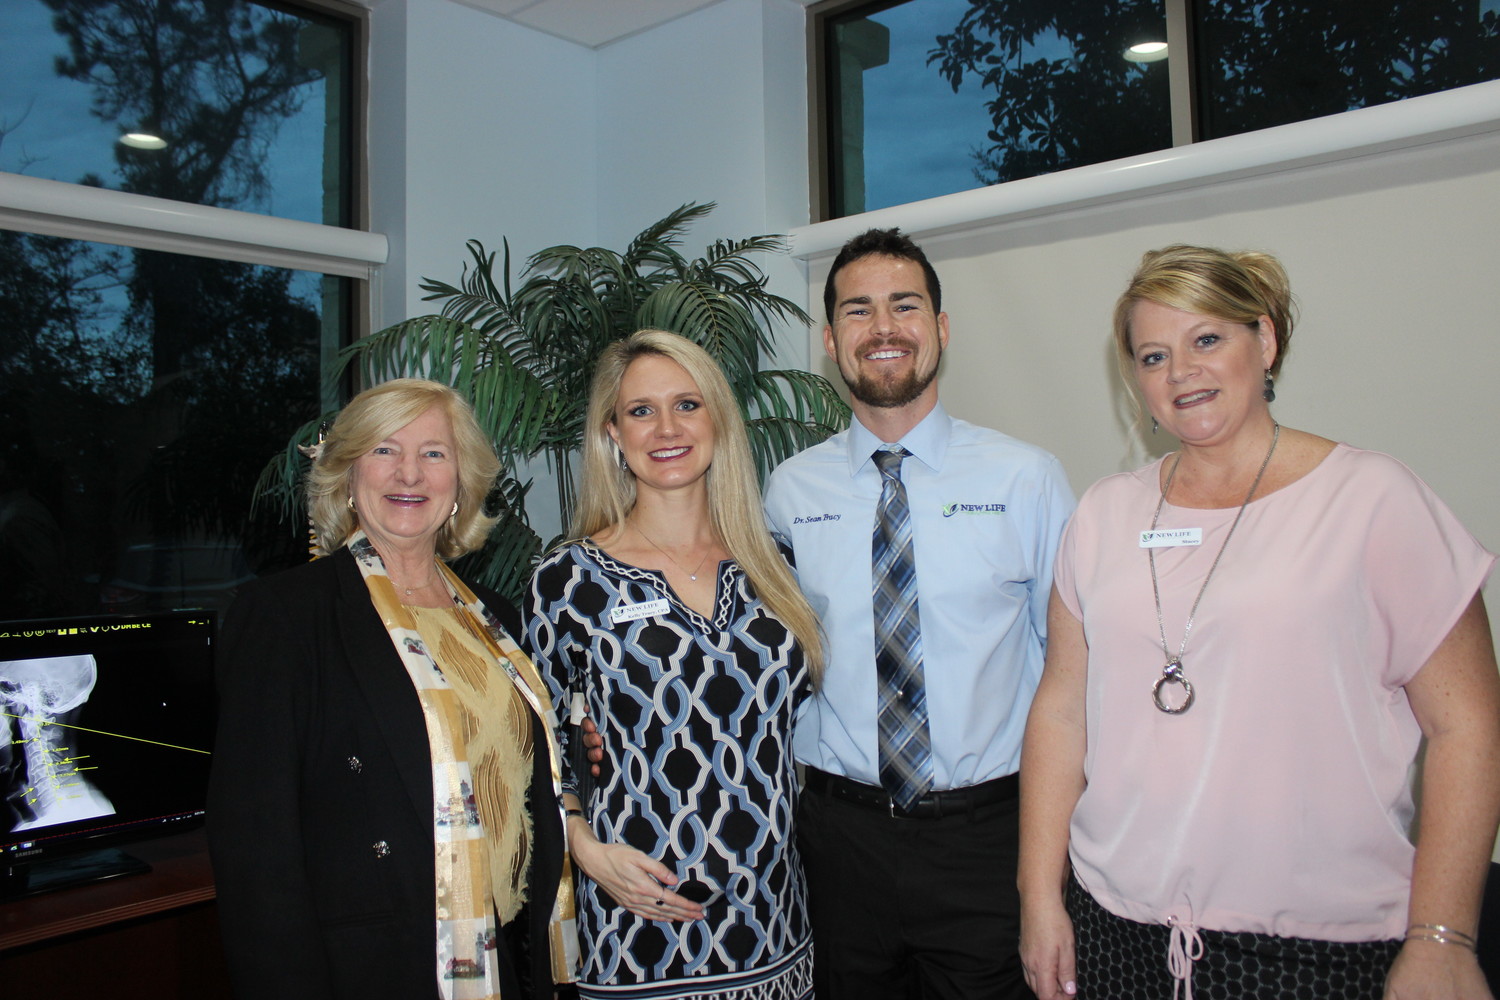 Dr. Marijane Boyd, Kelly and Dr Sean Tracy and Stacey Gabby of New Life Healthcare gather at the Jan. 24 Chamber “After Hours” event.